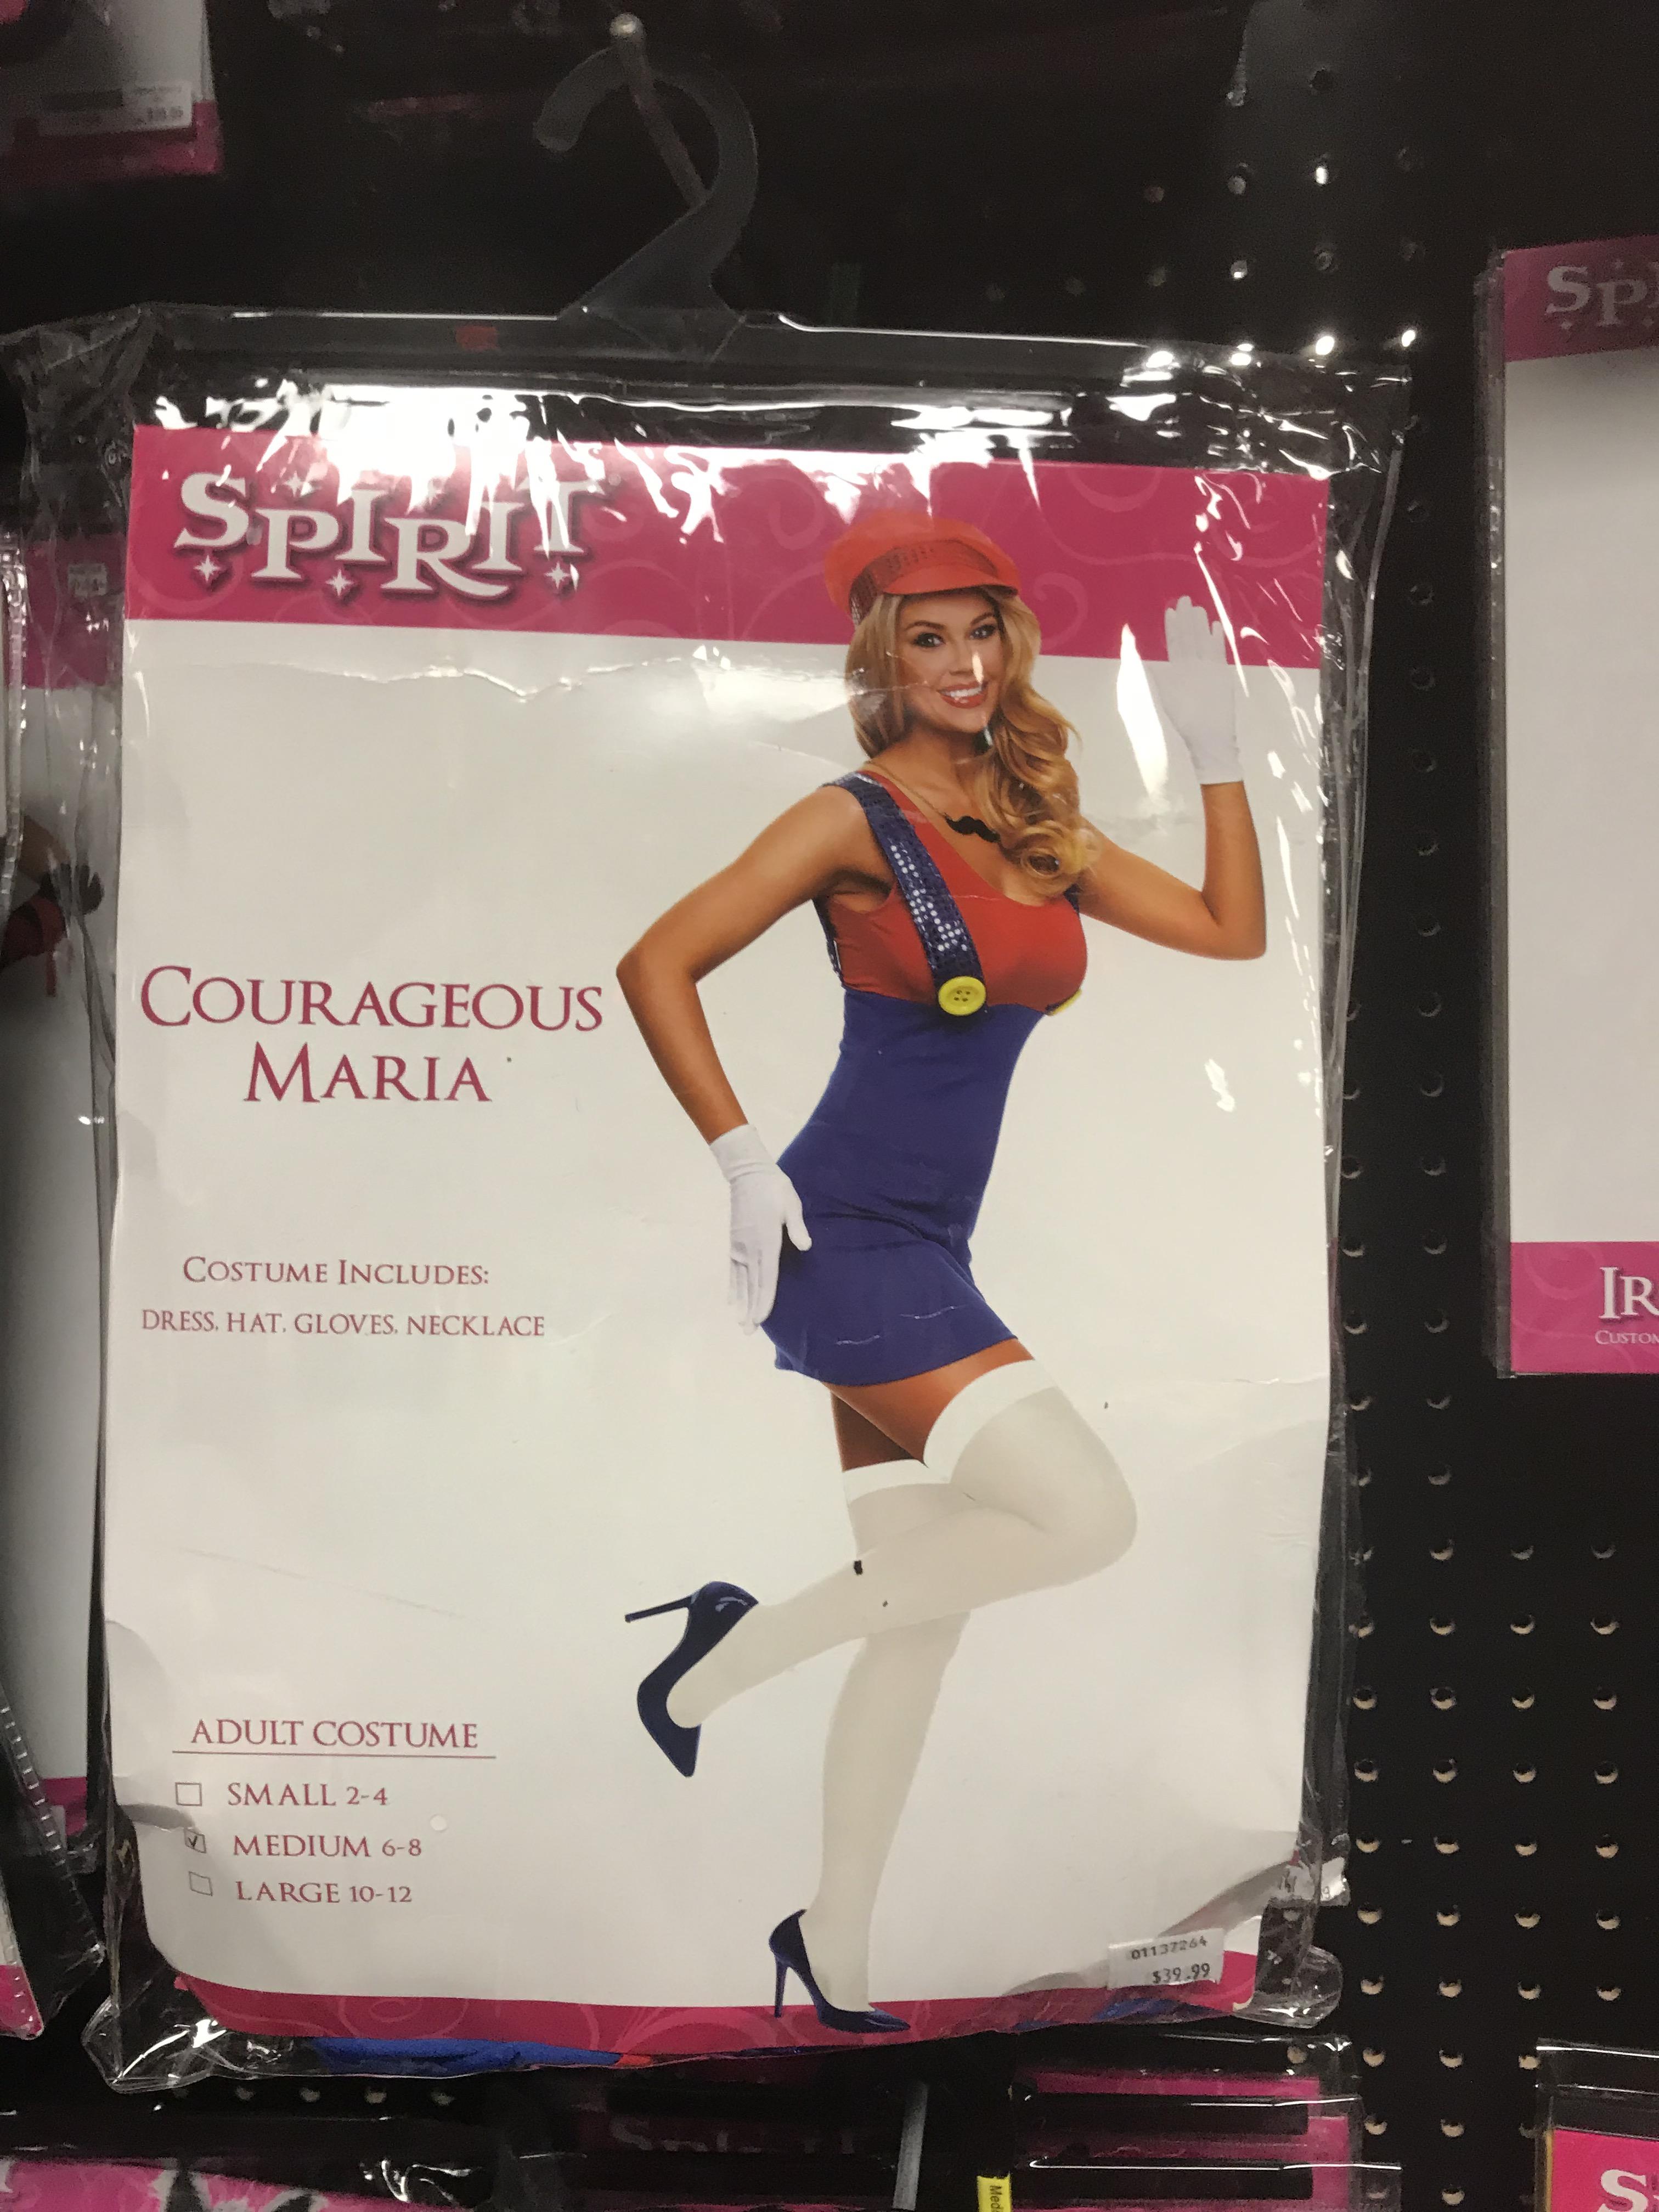 12 Slightly off Halloween Costumes That'll Make You Take a Second Look